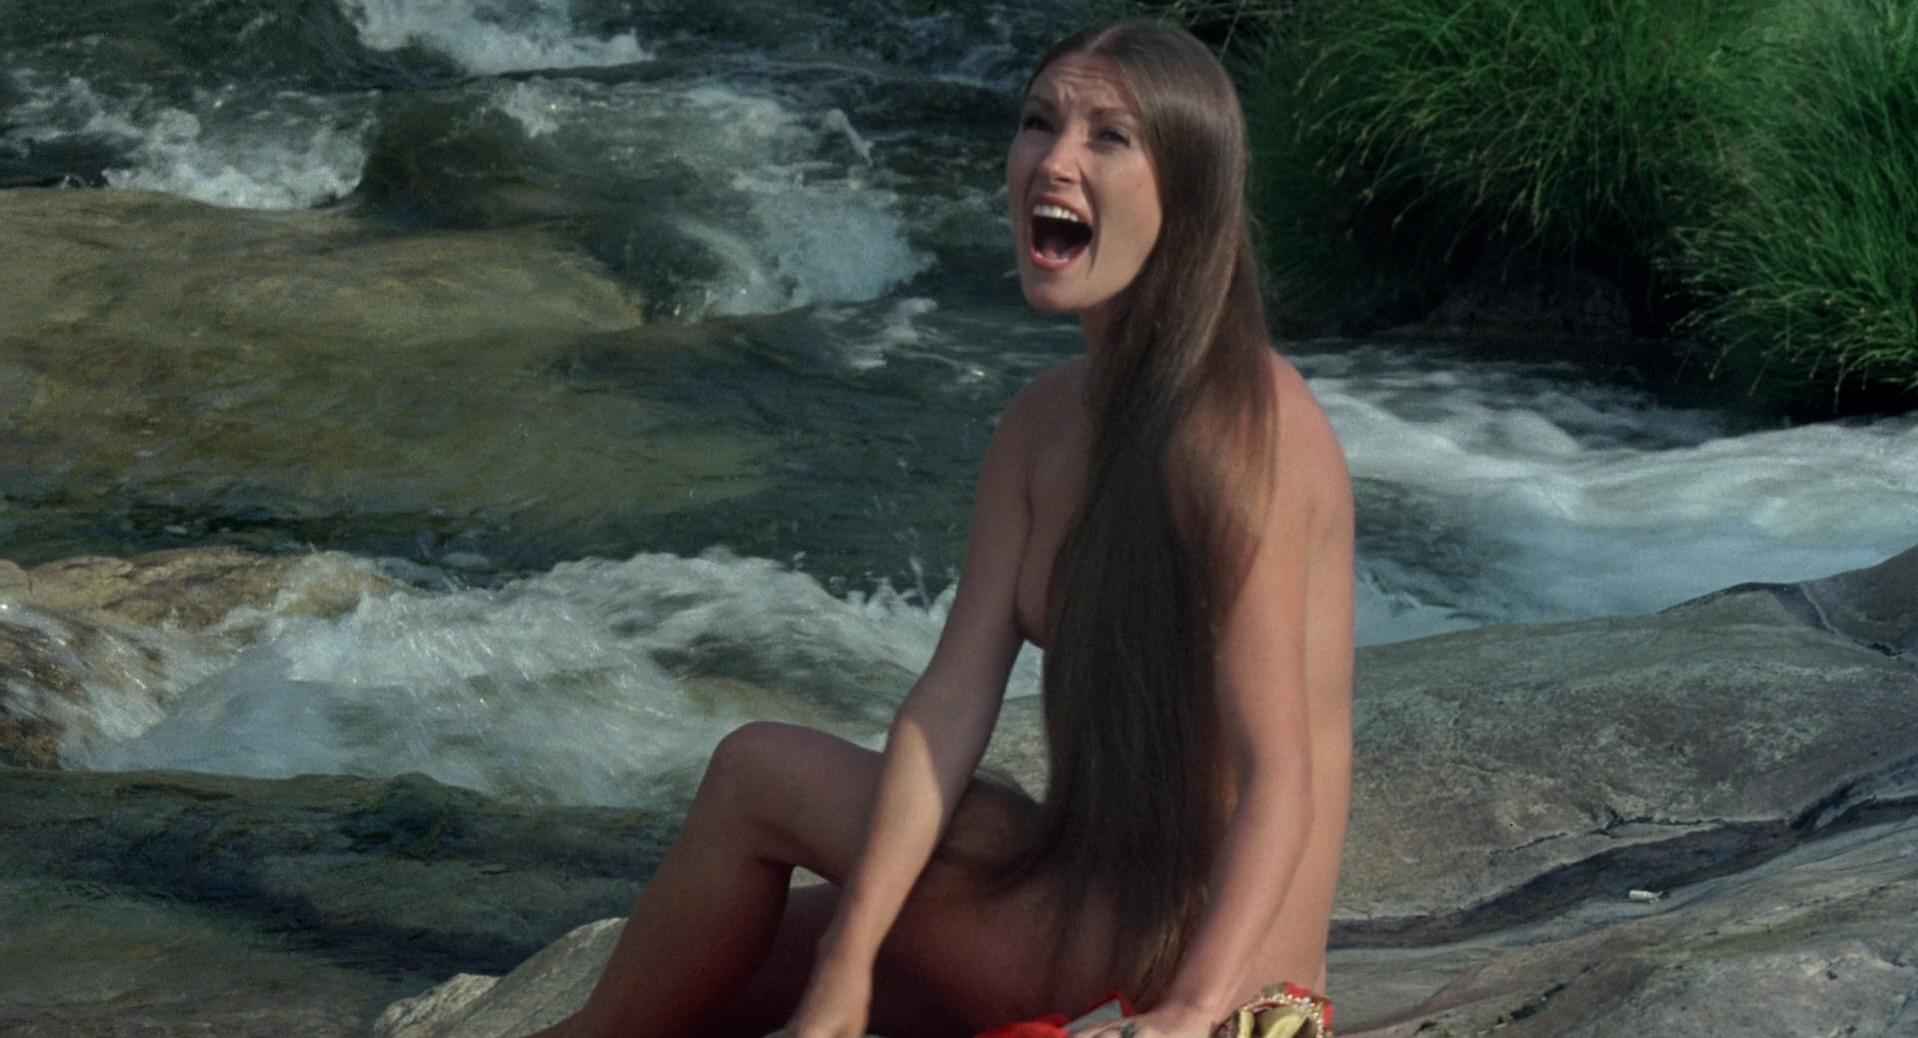 Jane Seymour in nude scene from Sinbad and the Eye of the Tiger which was r...